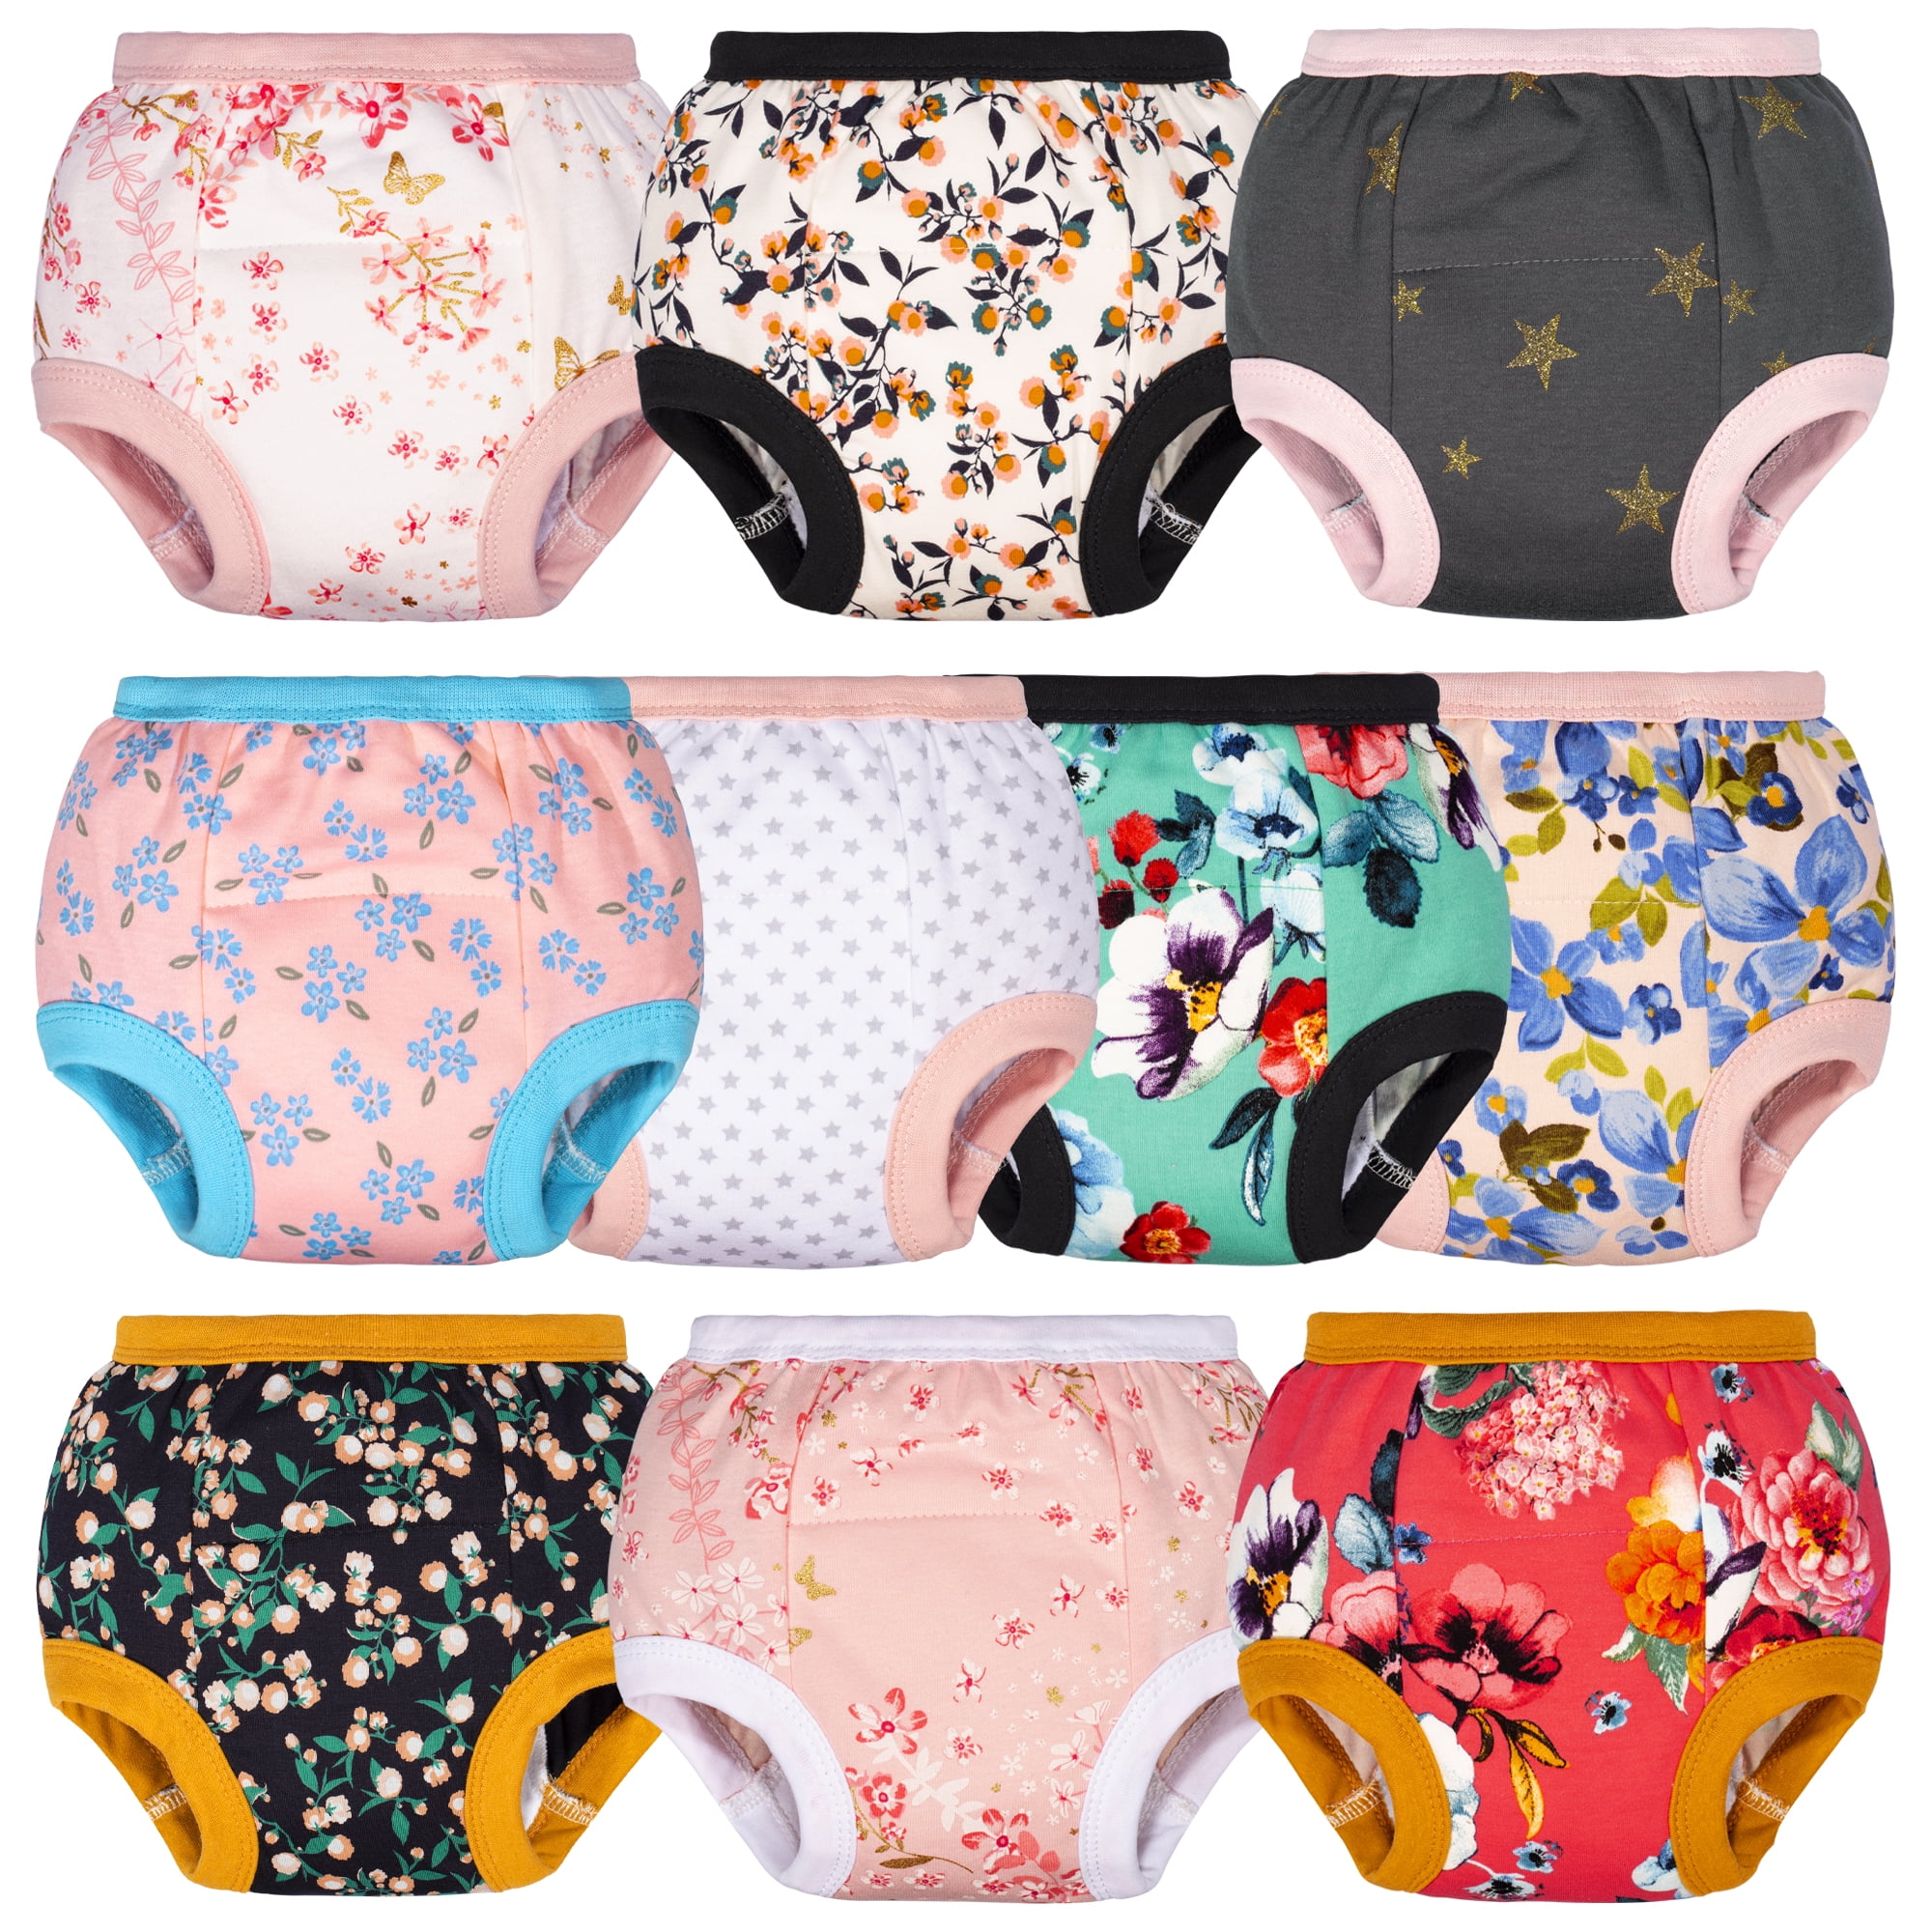 BIG ELEPHANT Baby Girls Training Underpants Toddler Training Pants 3 Pack 12 Months-5T 